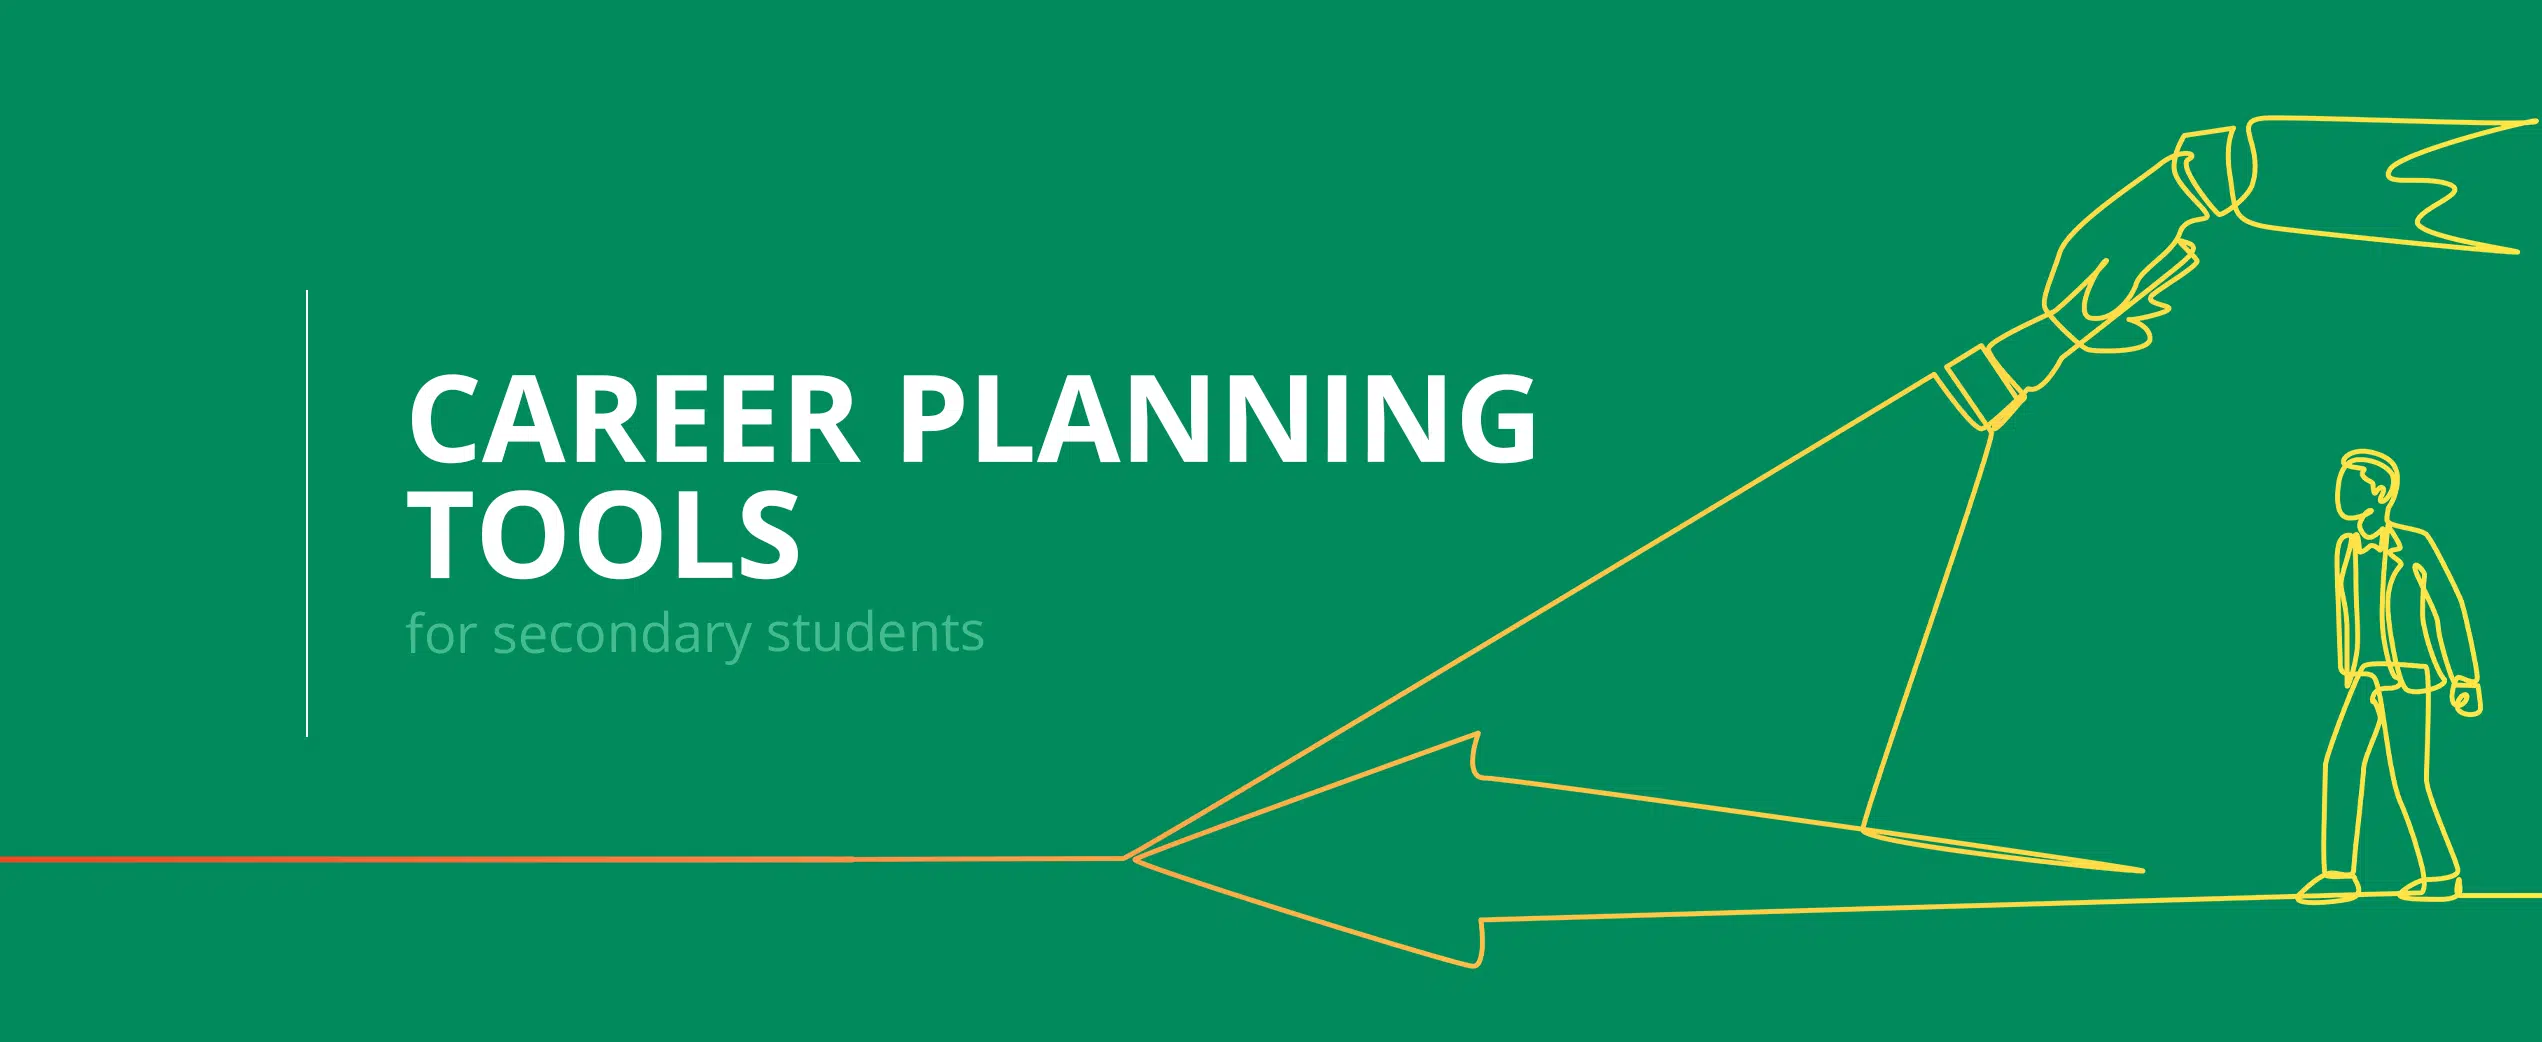 The need for career planning tools for secondary students